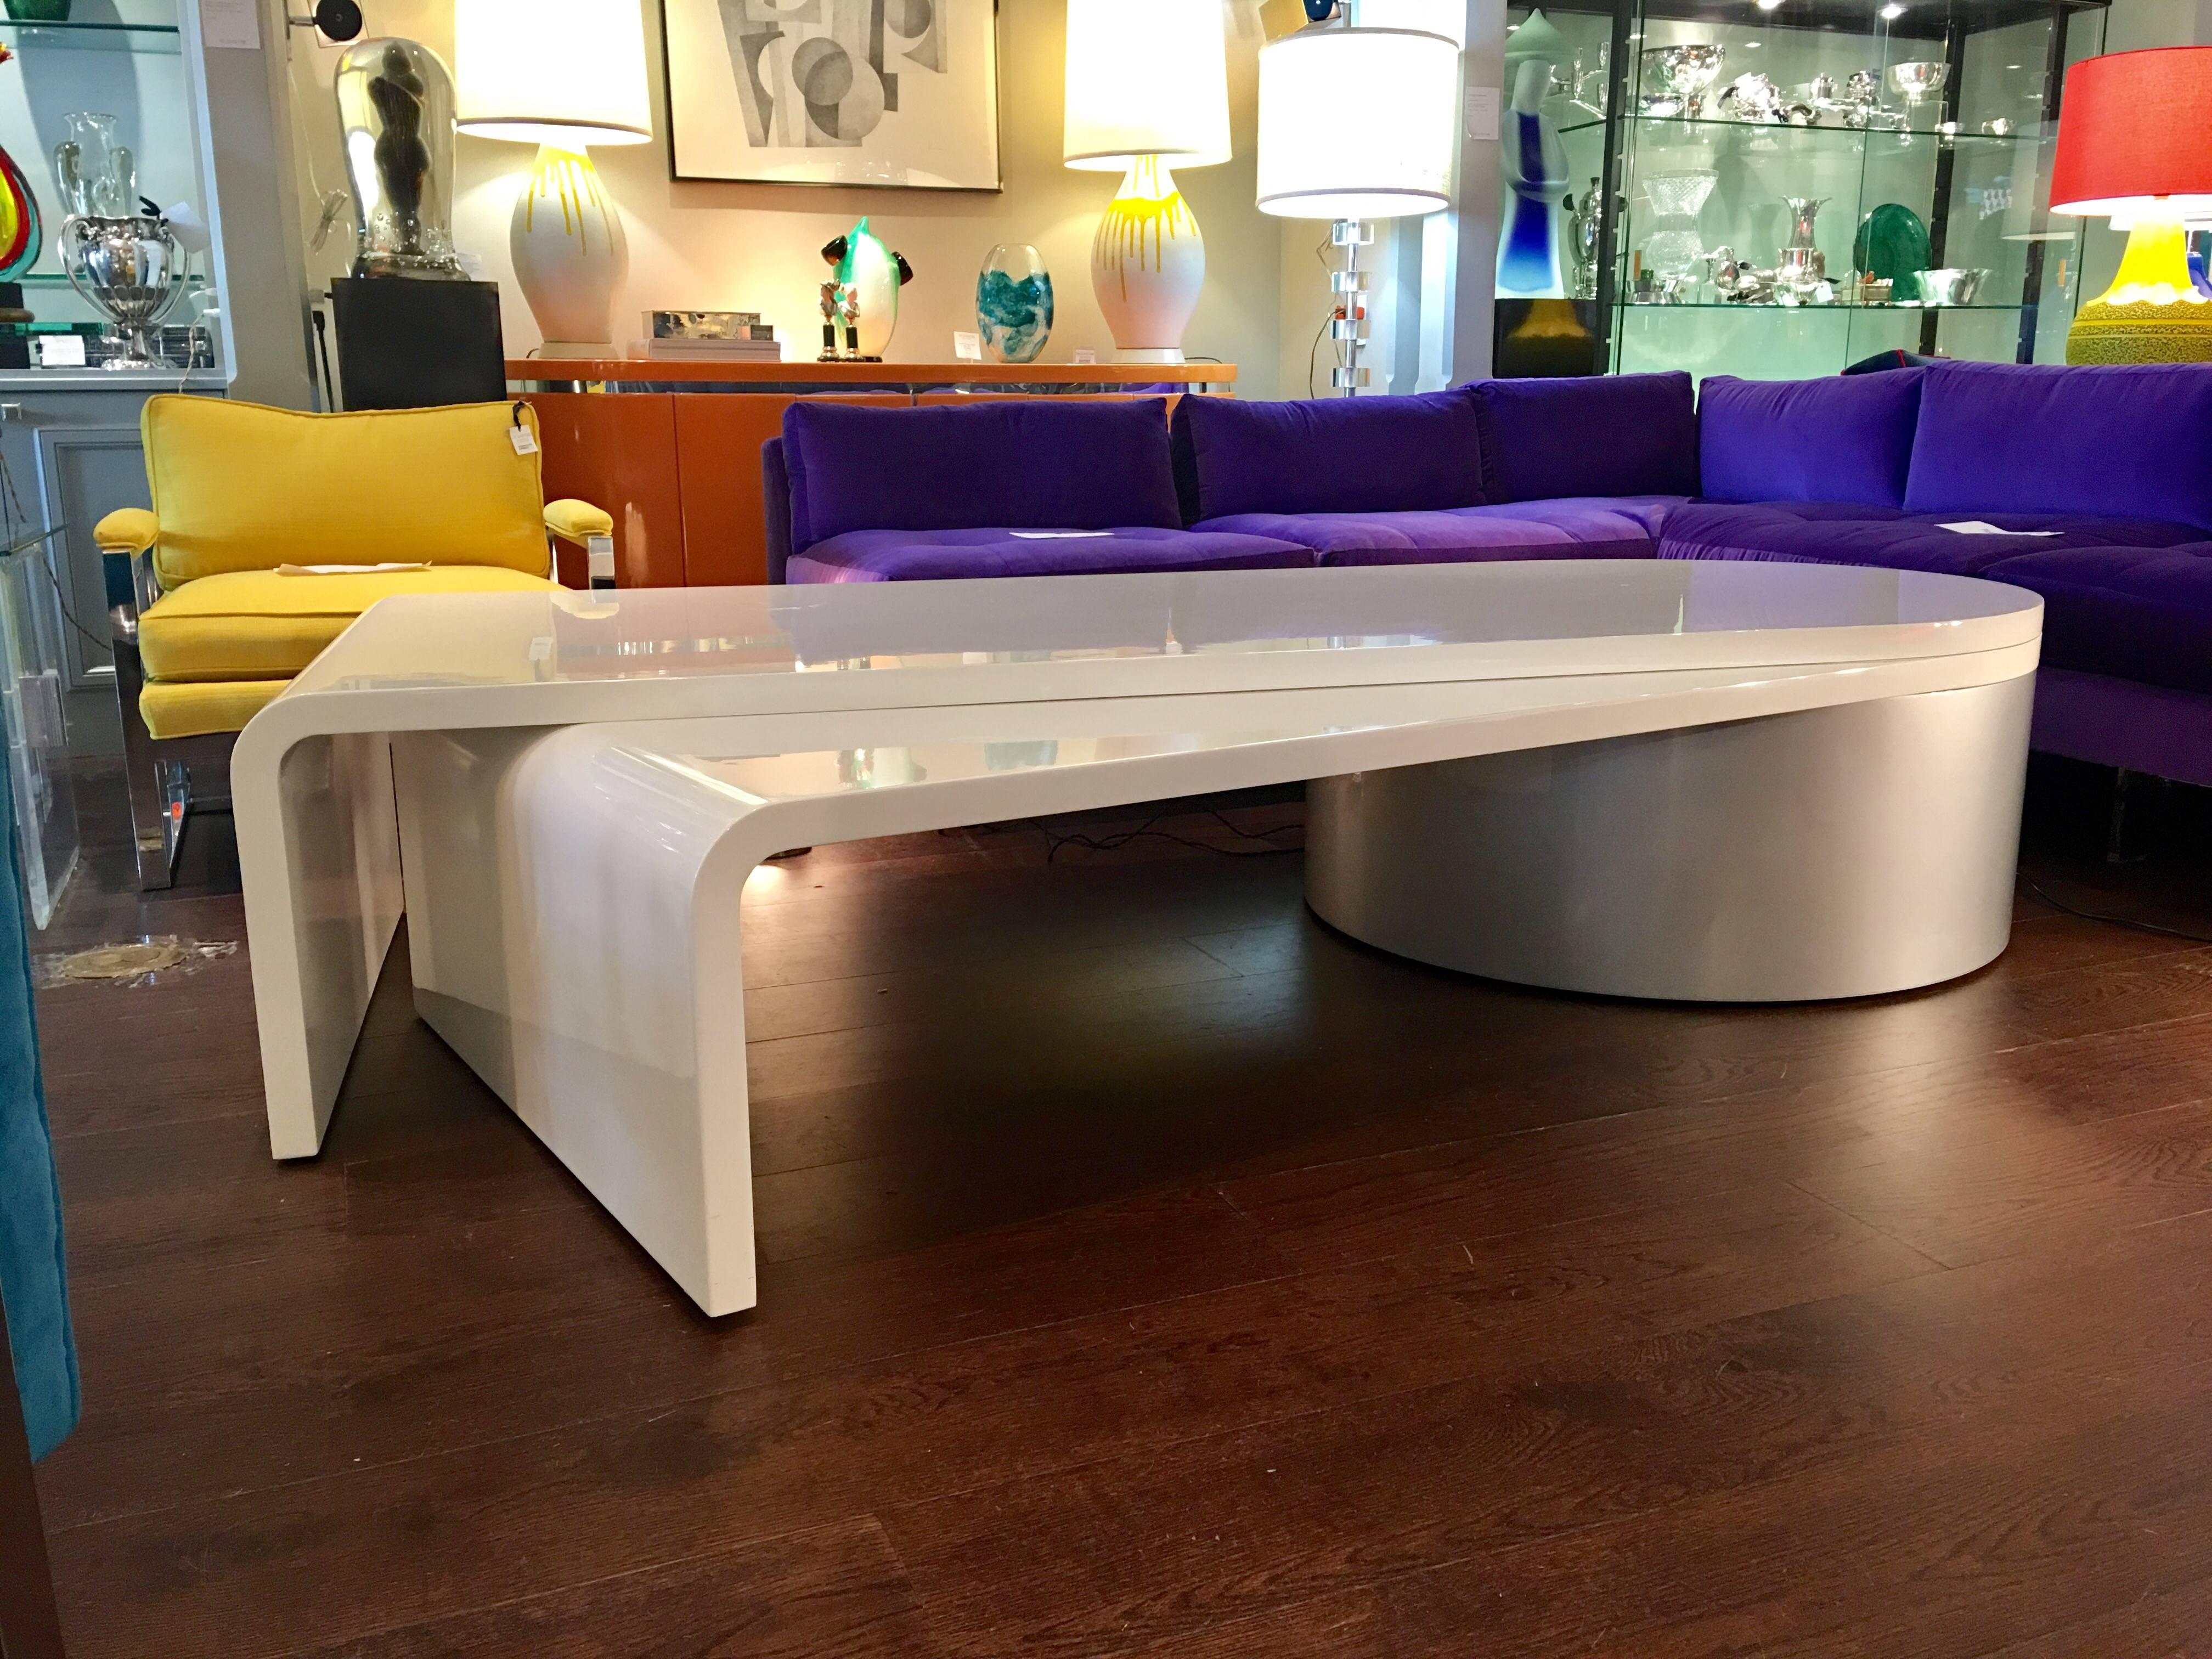 Wonderful monumental vintage coffee table with fixed overlapping extension. Has been completed restored with new white lacquer finish, circa 1970s.